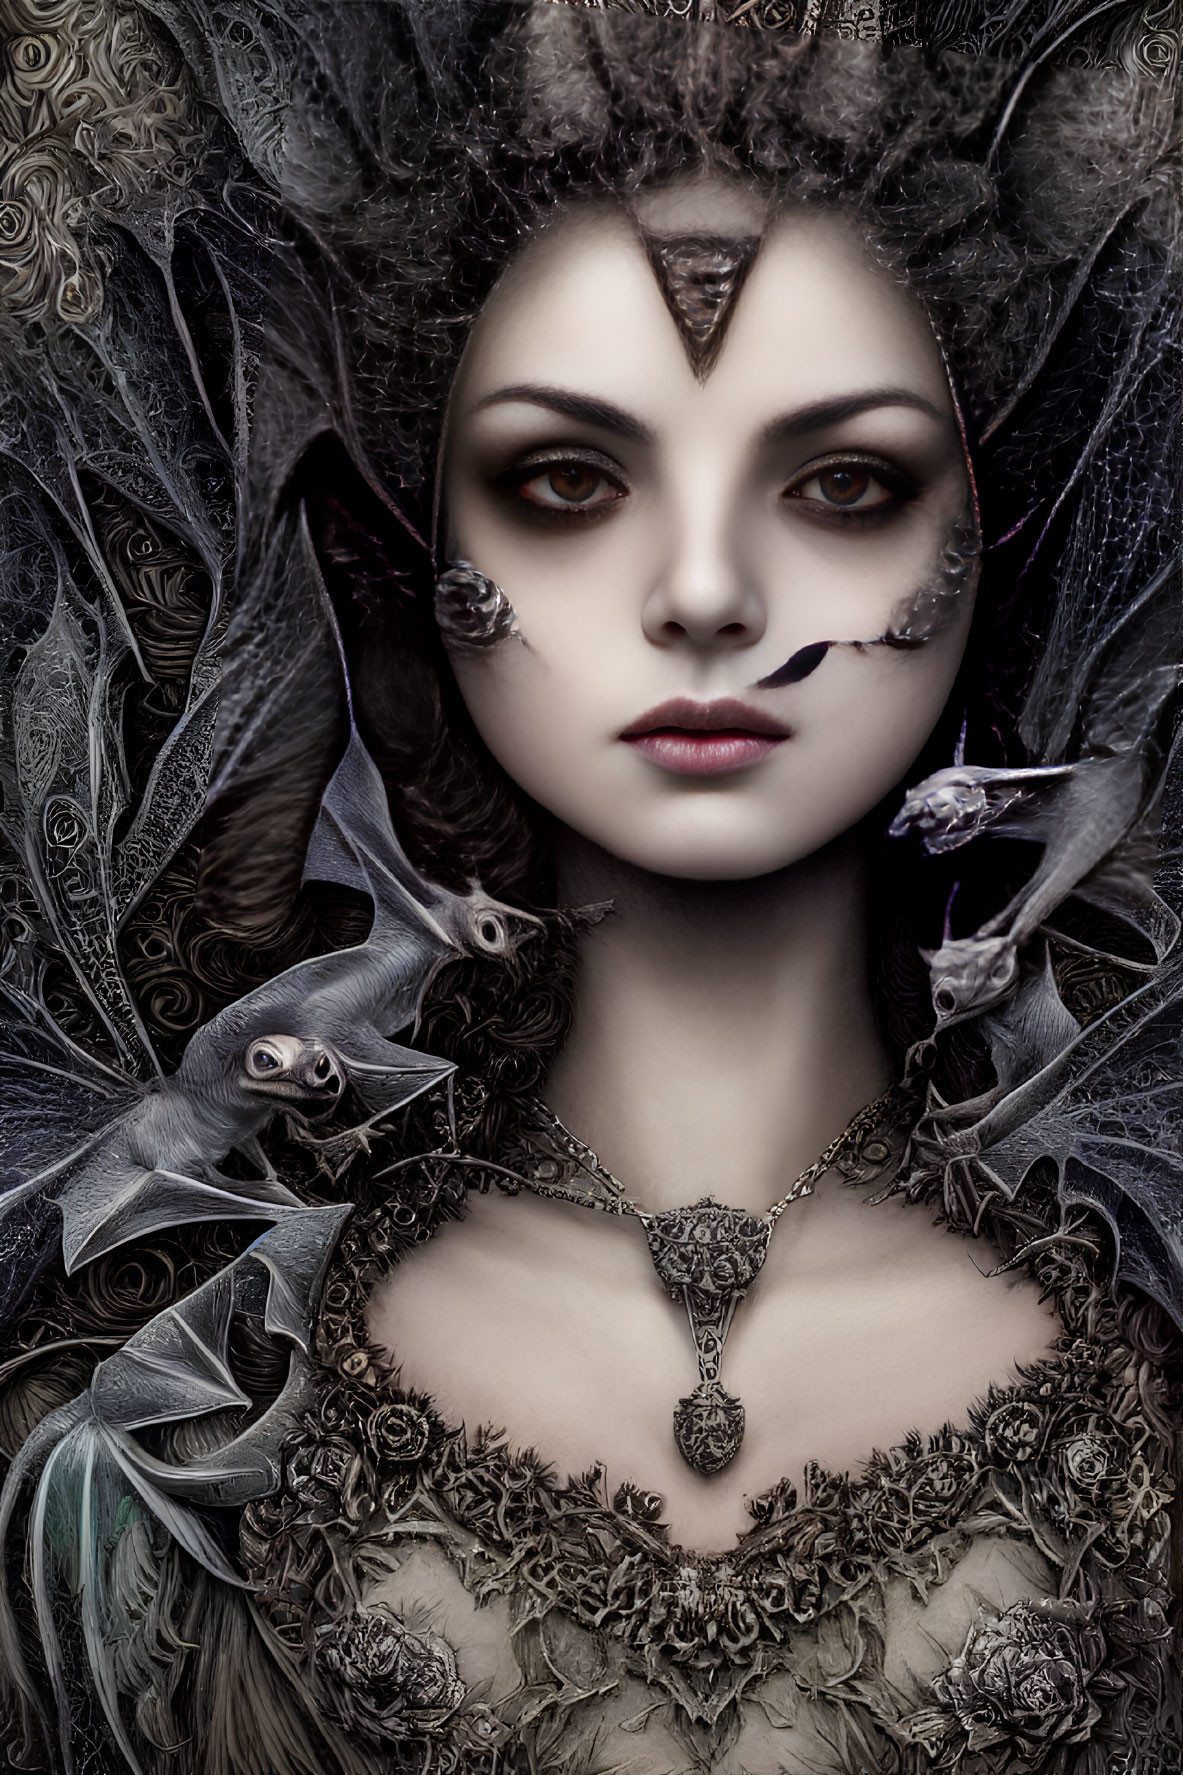 Gothic fantasy portrait of pale woman with dark makeup and bats